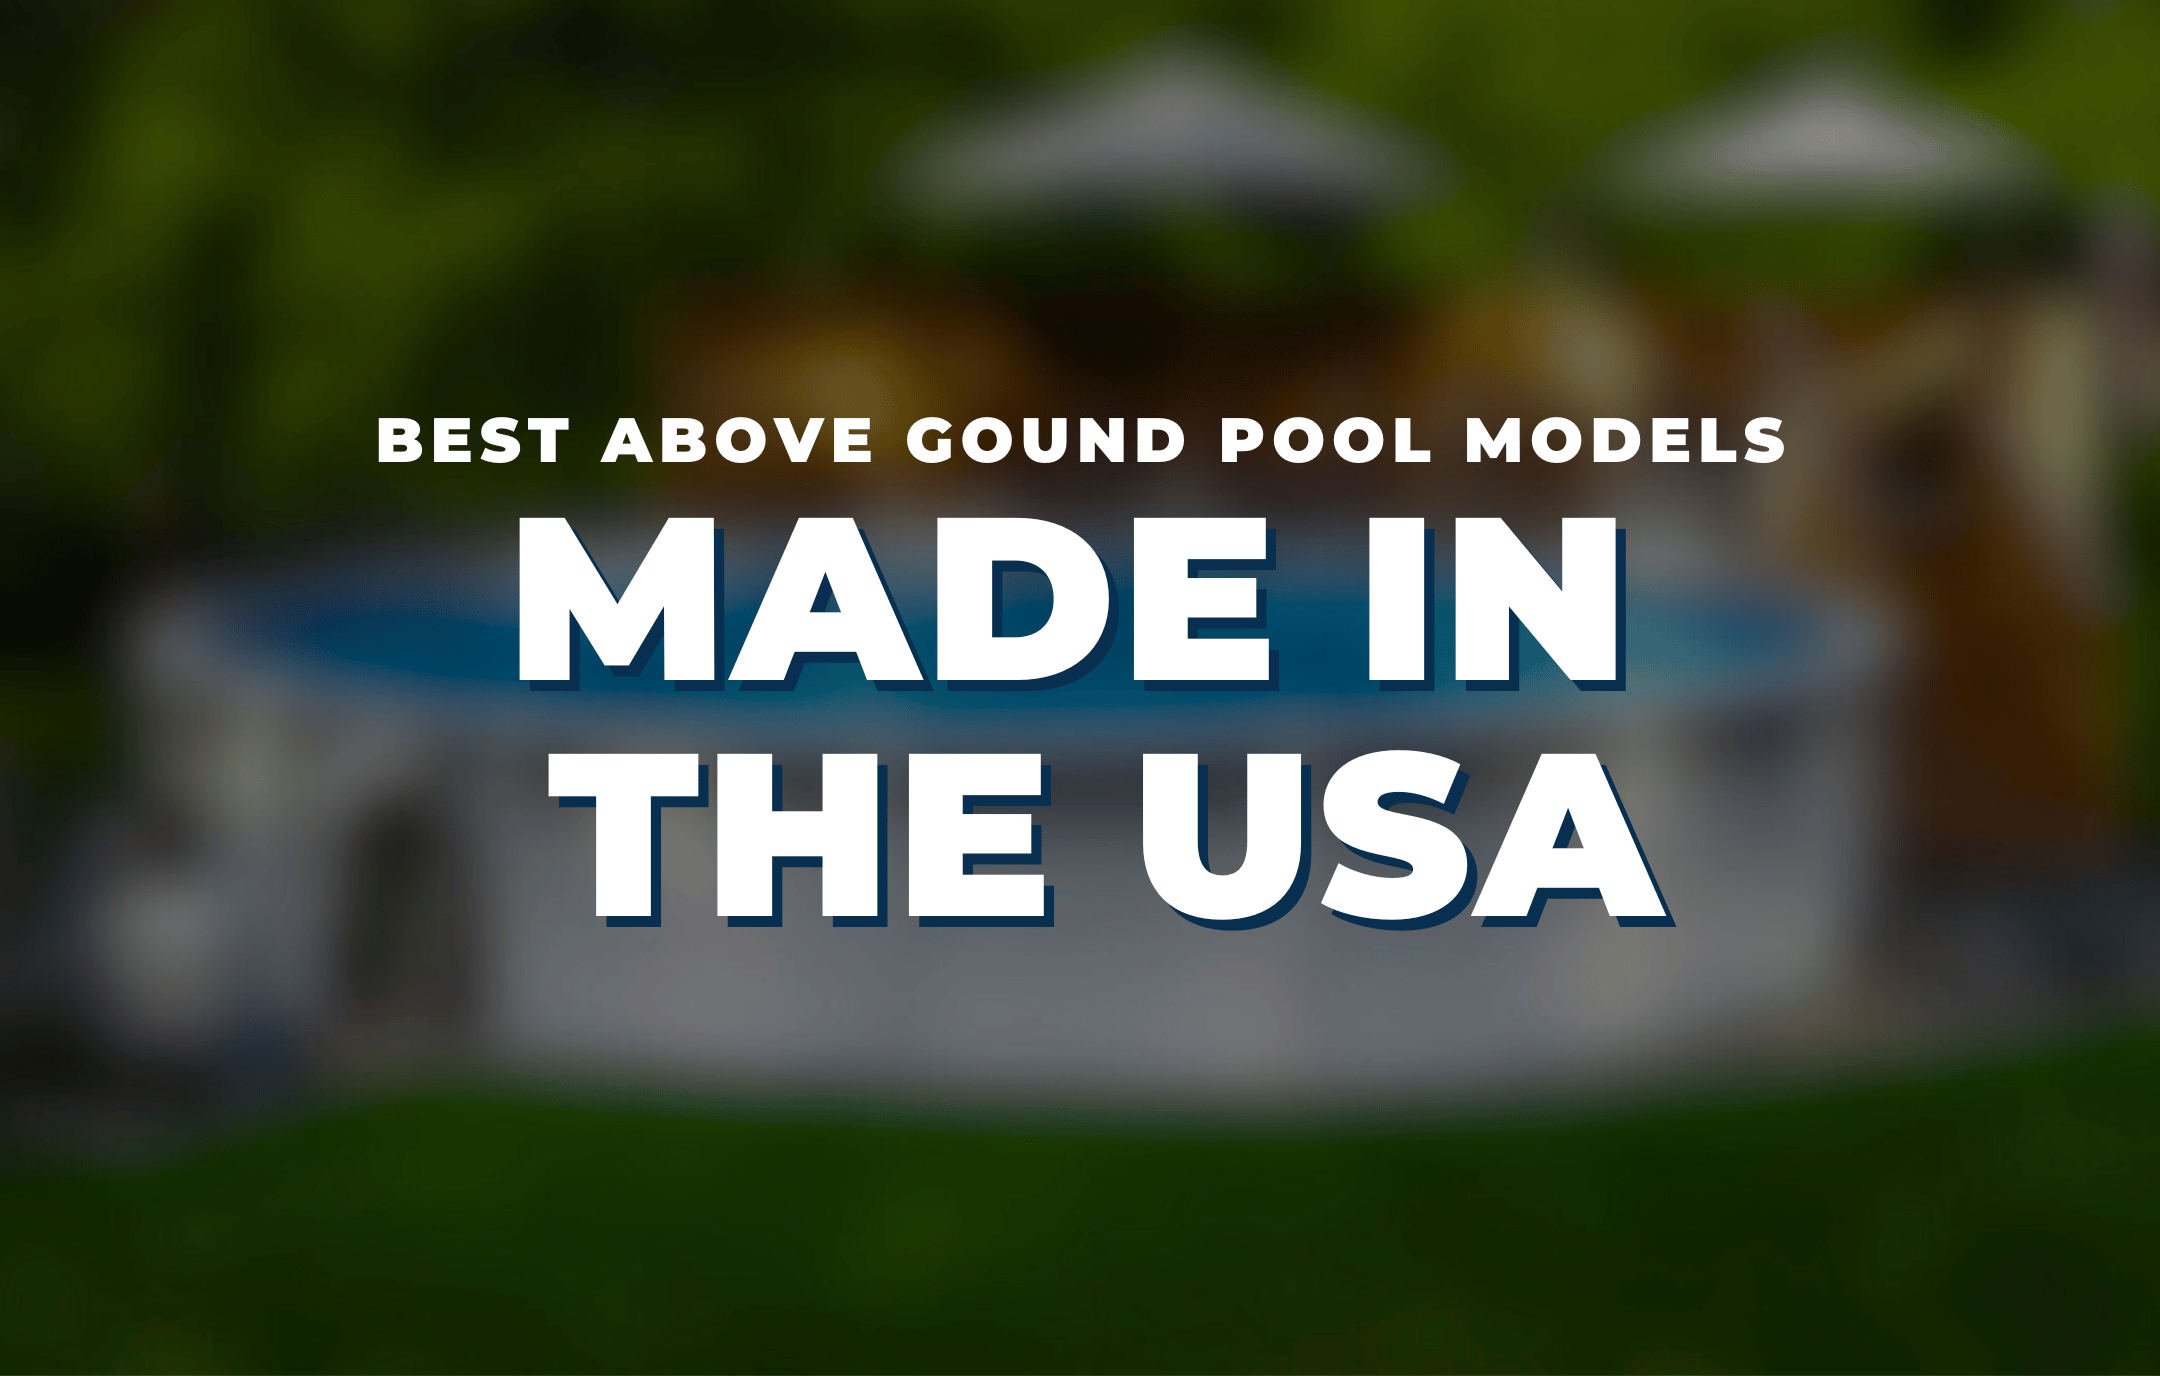 Best Above Ground Pool Models Made In The USA